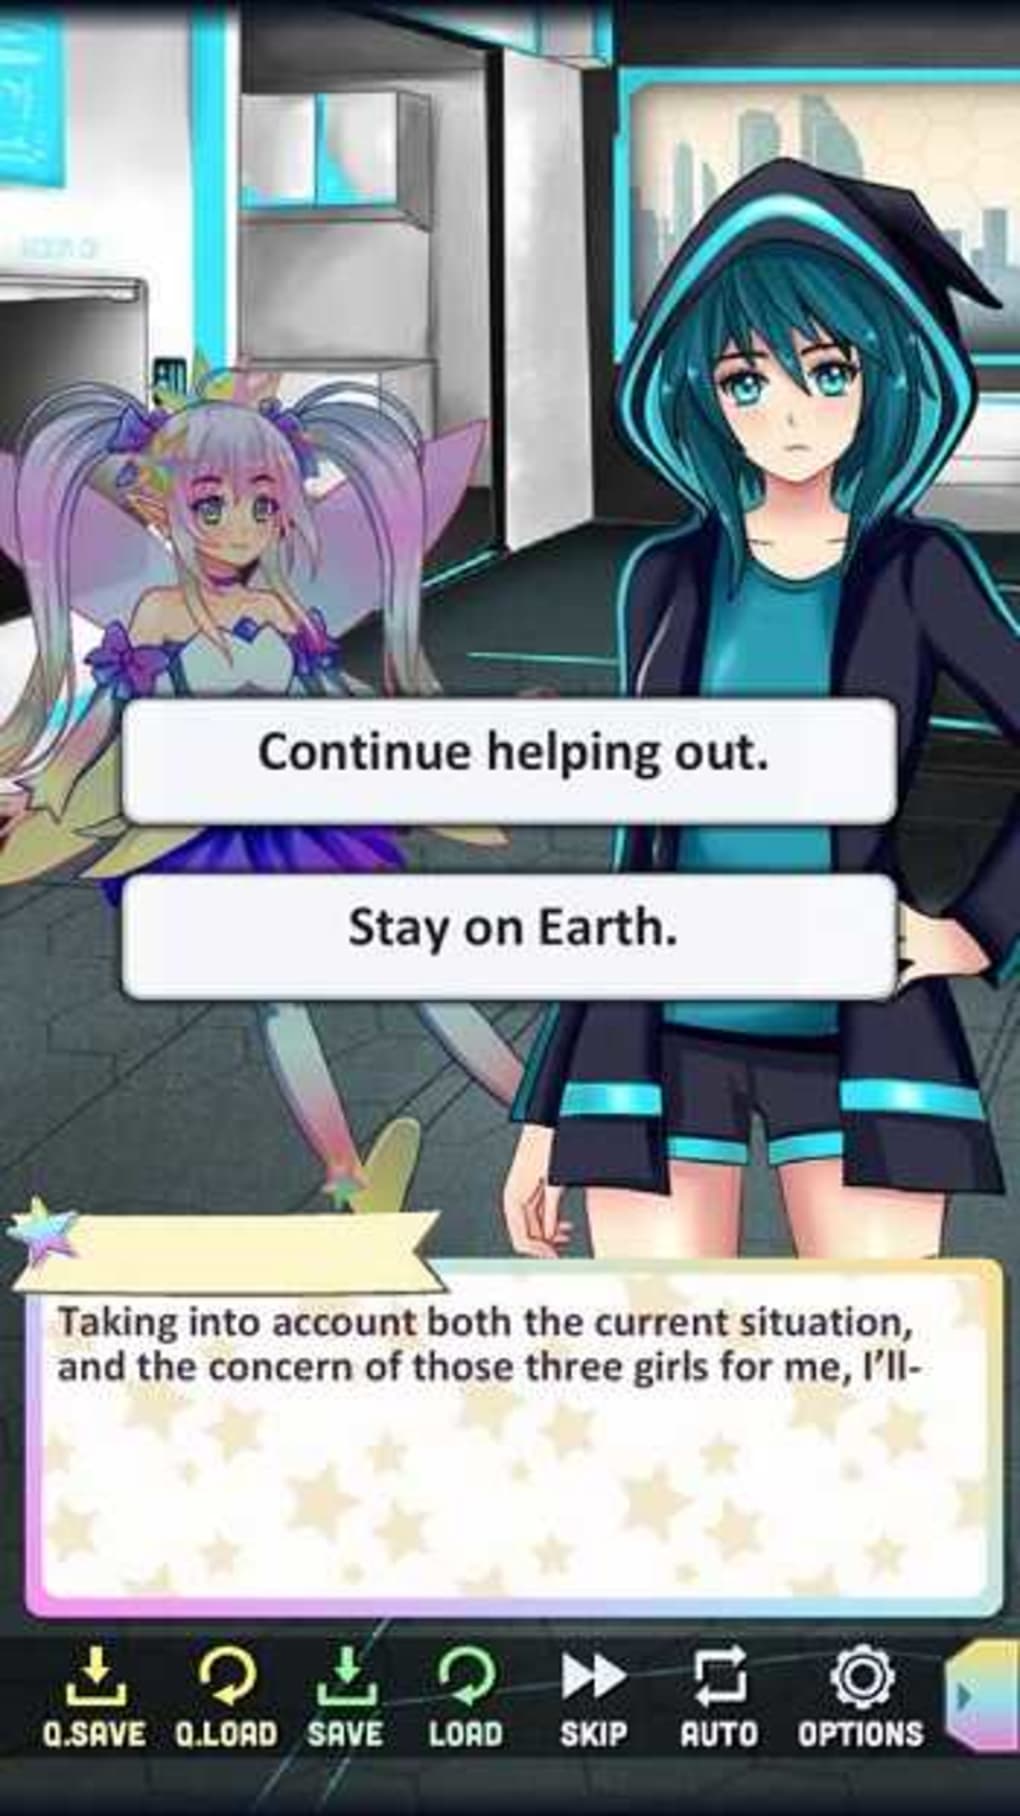 Gacha Star Download - How to Download Gacha Star App on Mobile iOS